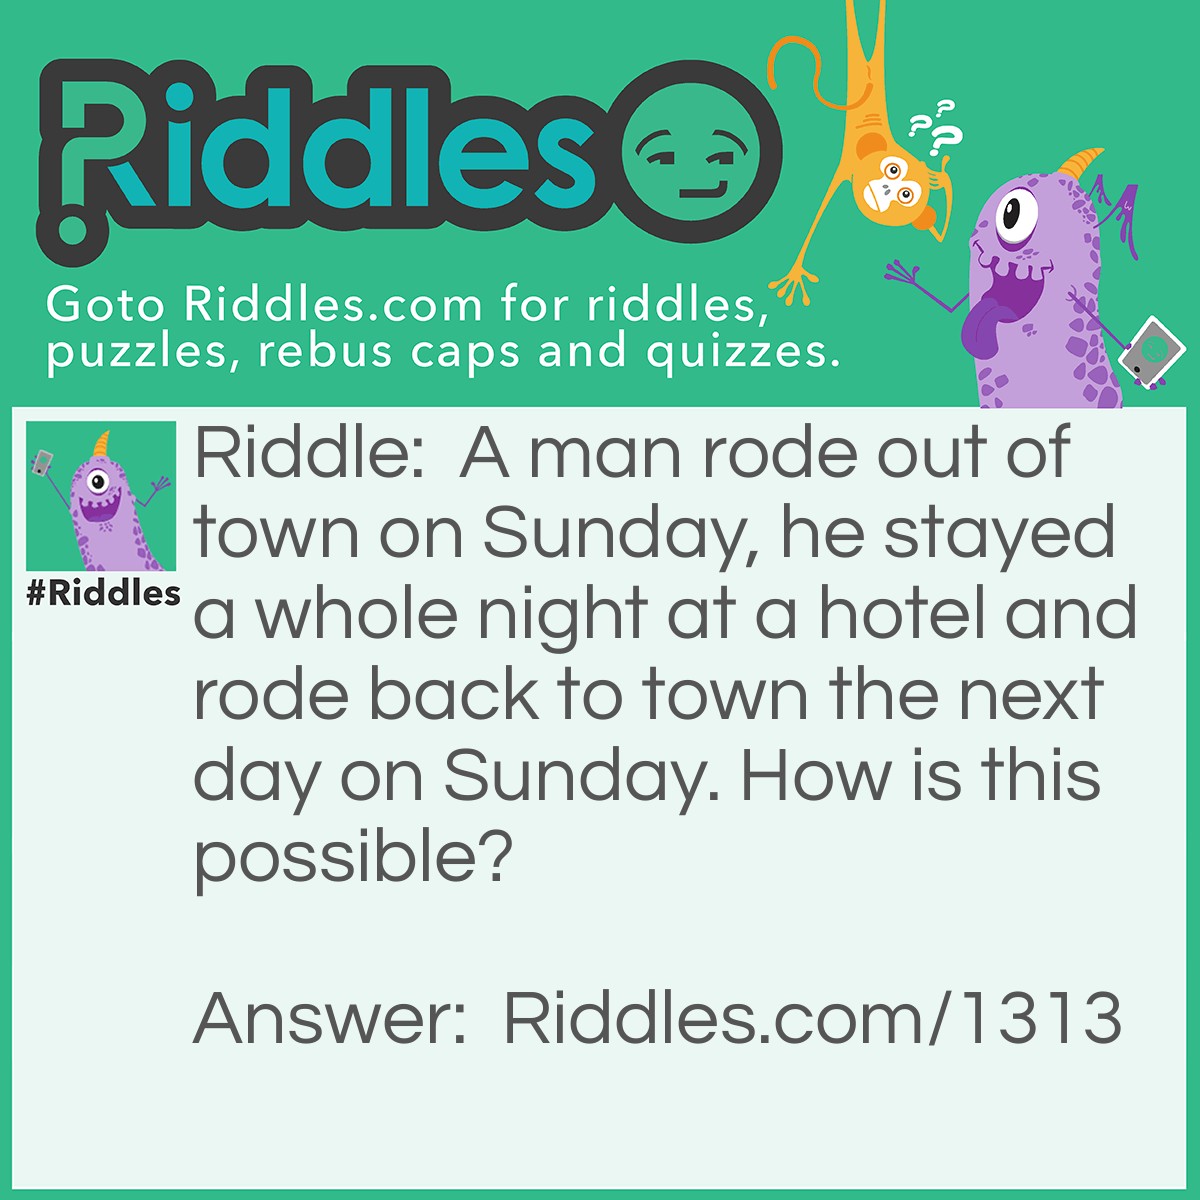 Riddle: A man rode out of town on Sunday, he stayed a whole night at a hotel and rode back to town the next day on Sunday. How is this possible? Answer: His Horse was called Sunday!